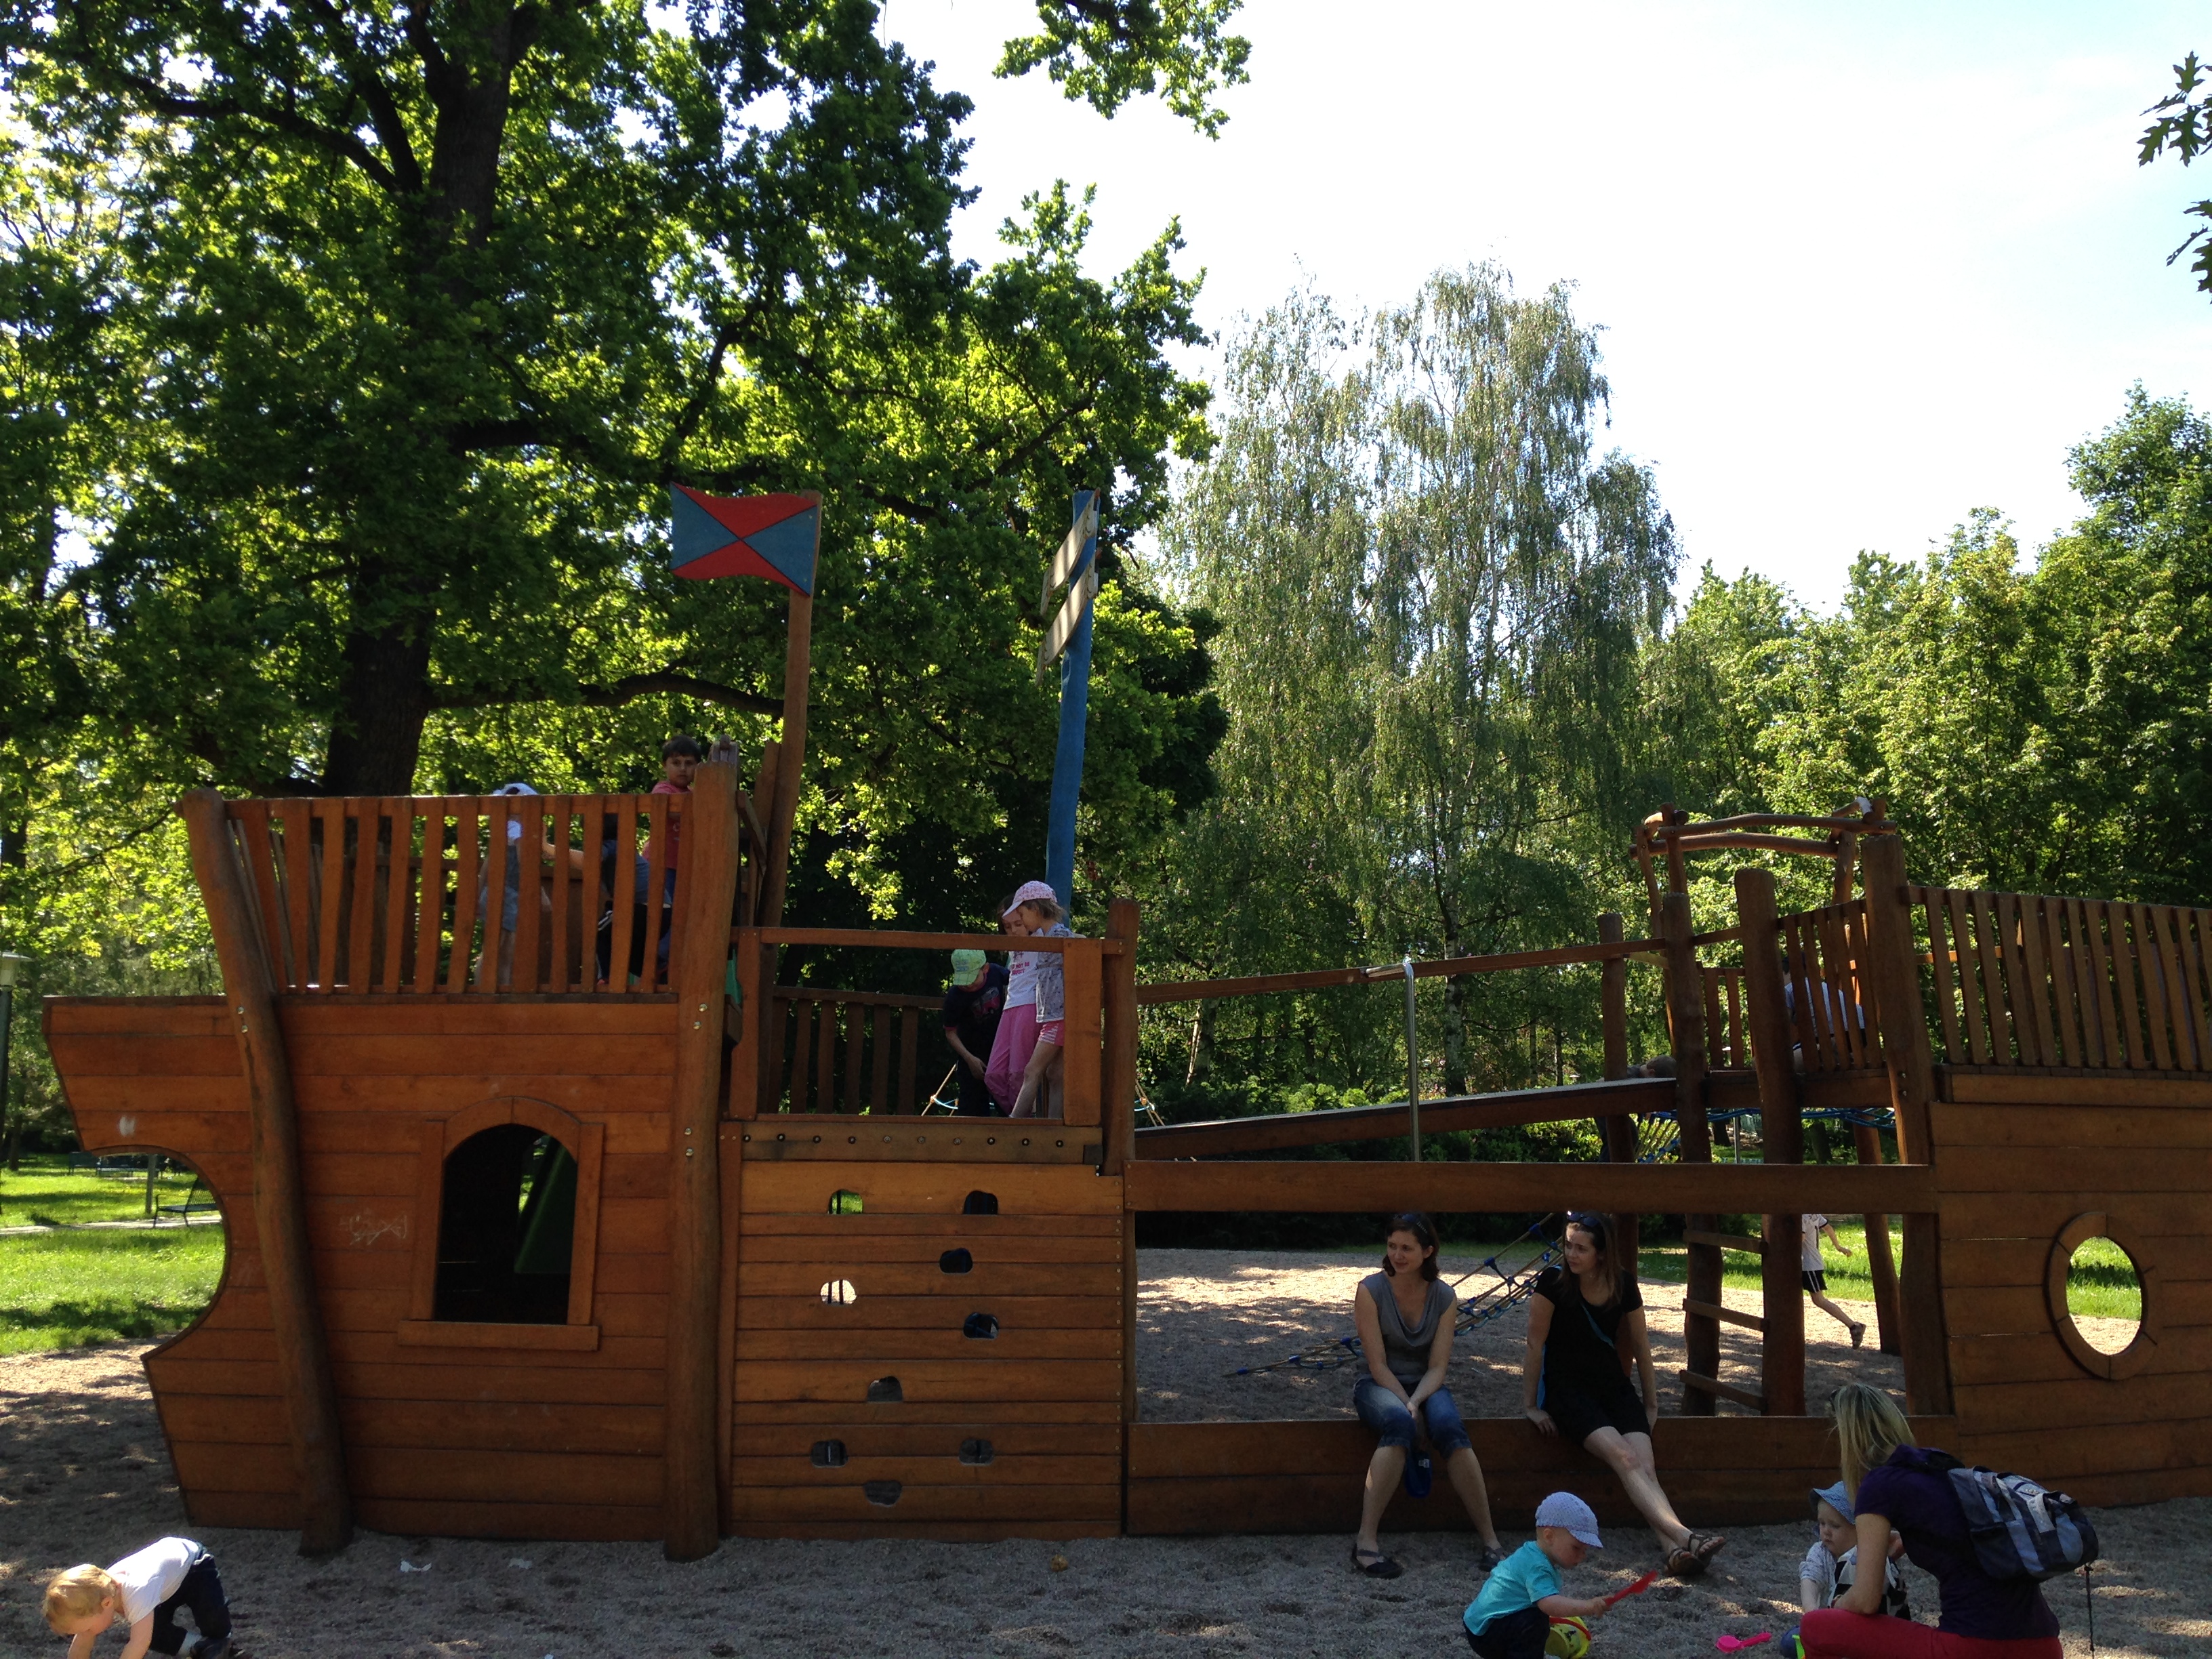 Playgrounds and playrooms